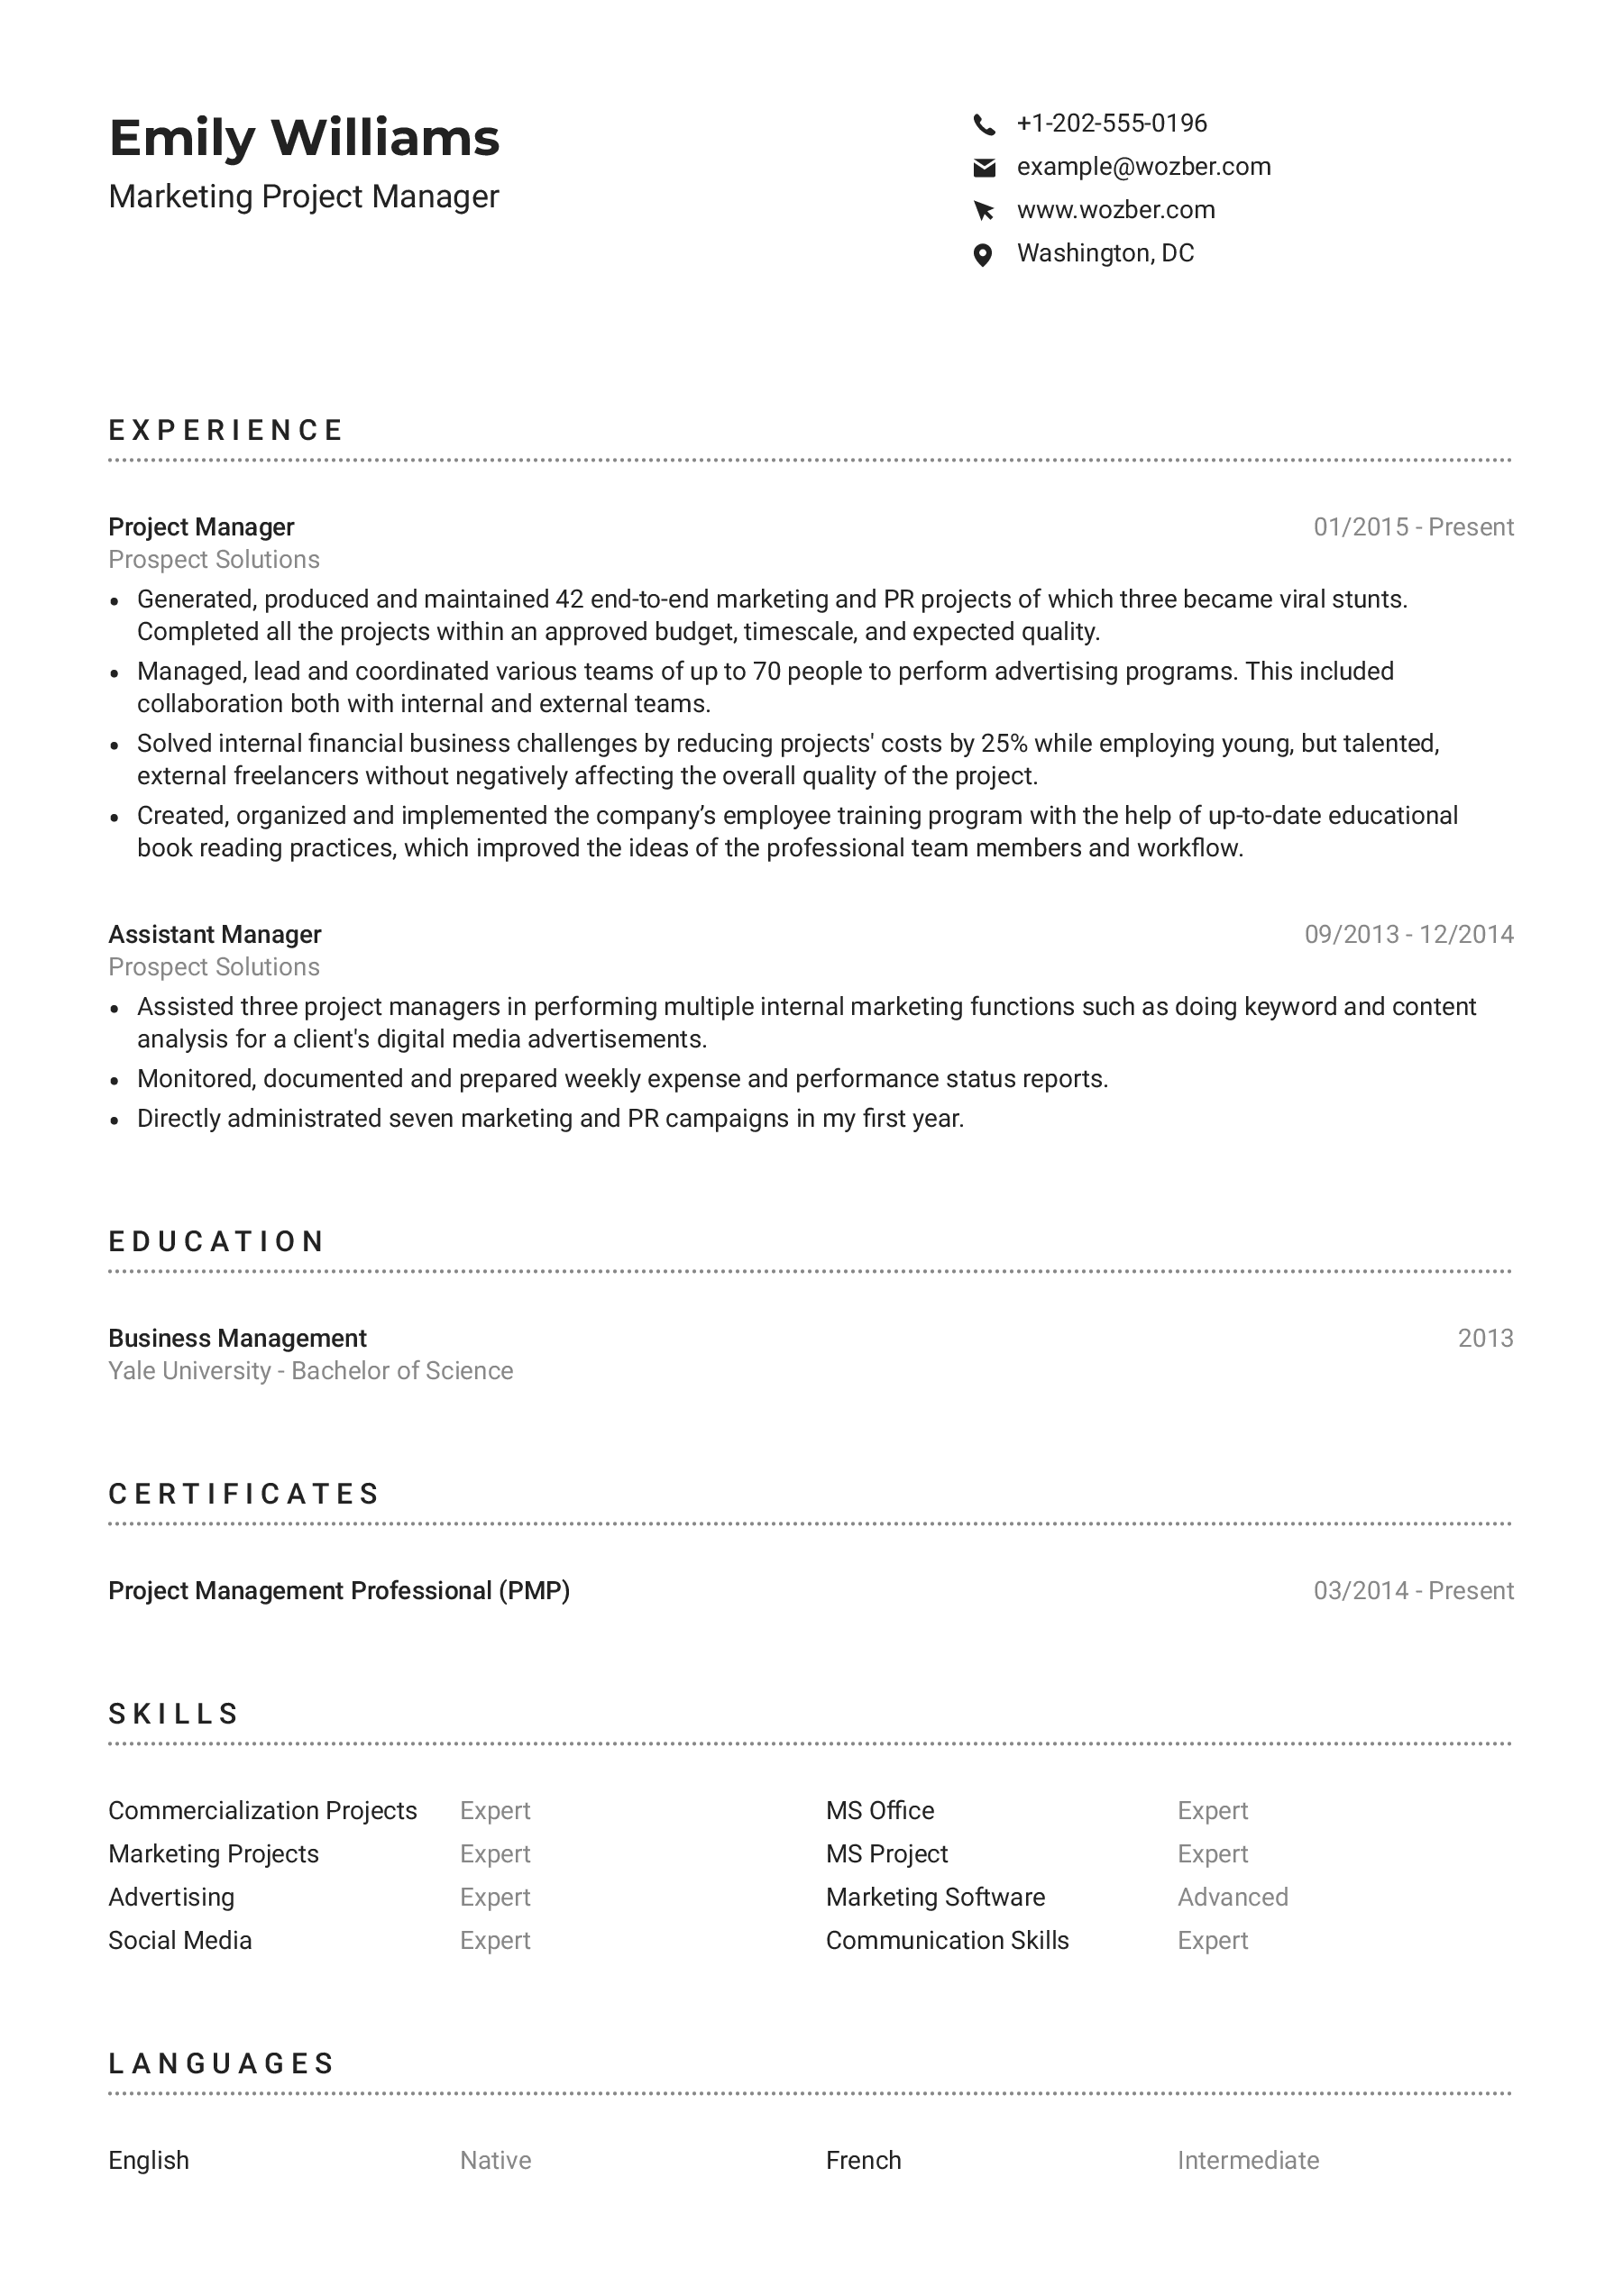 Modern resume example for Digital Marketing Project Manager 3 position